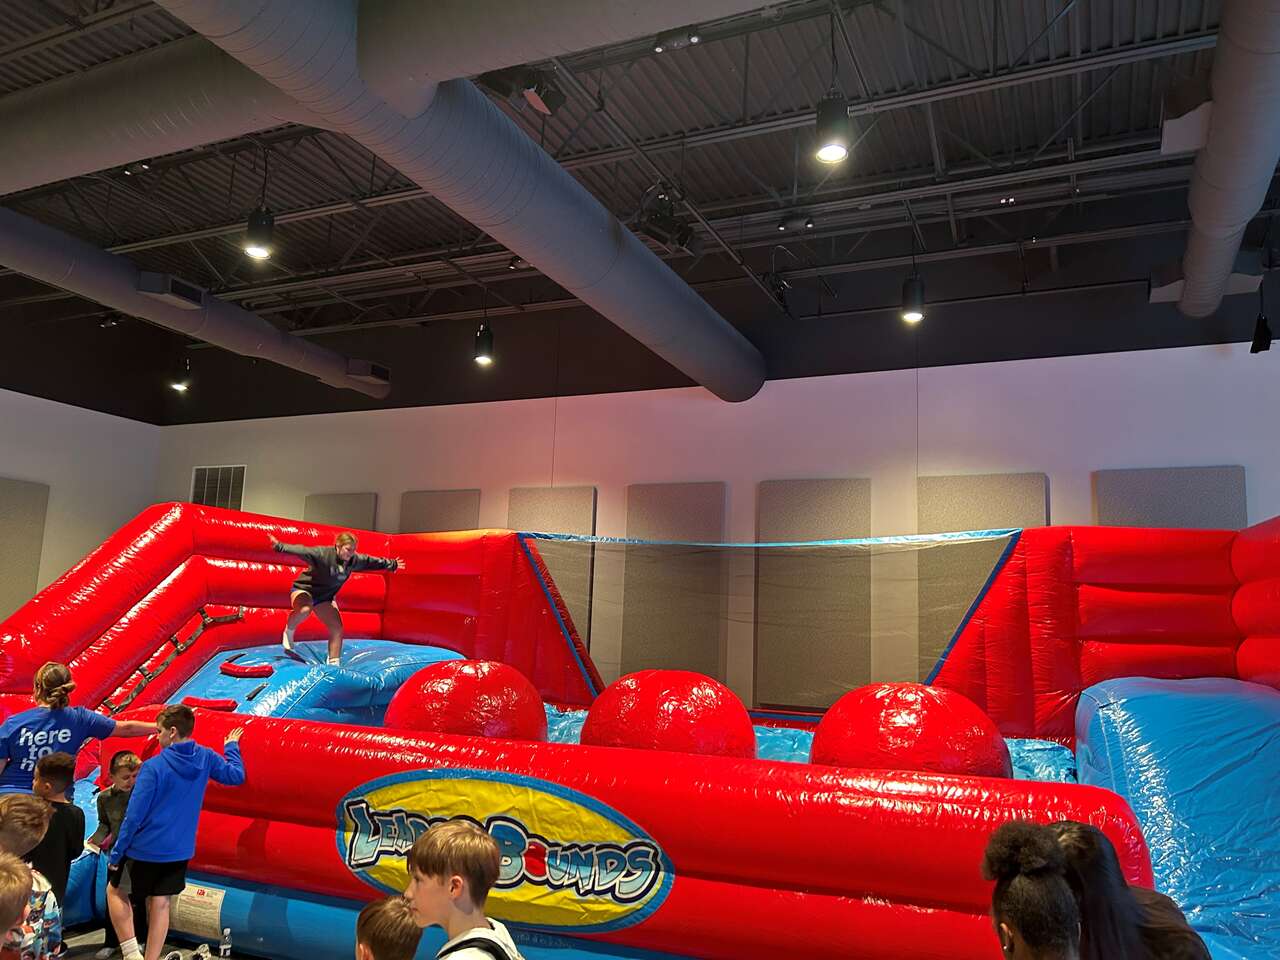 Specialty Inflatables and Interactives, Noblesville, IN